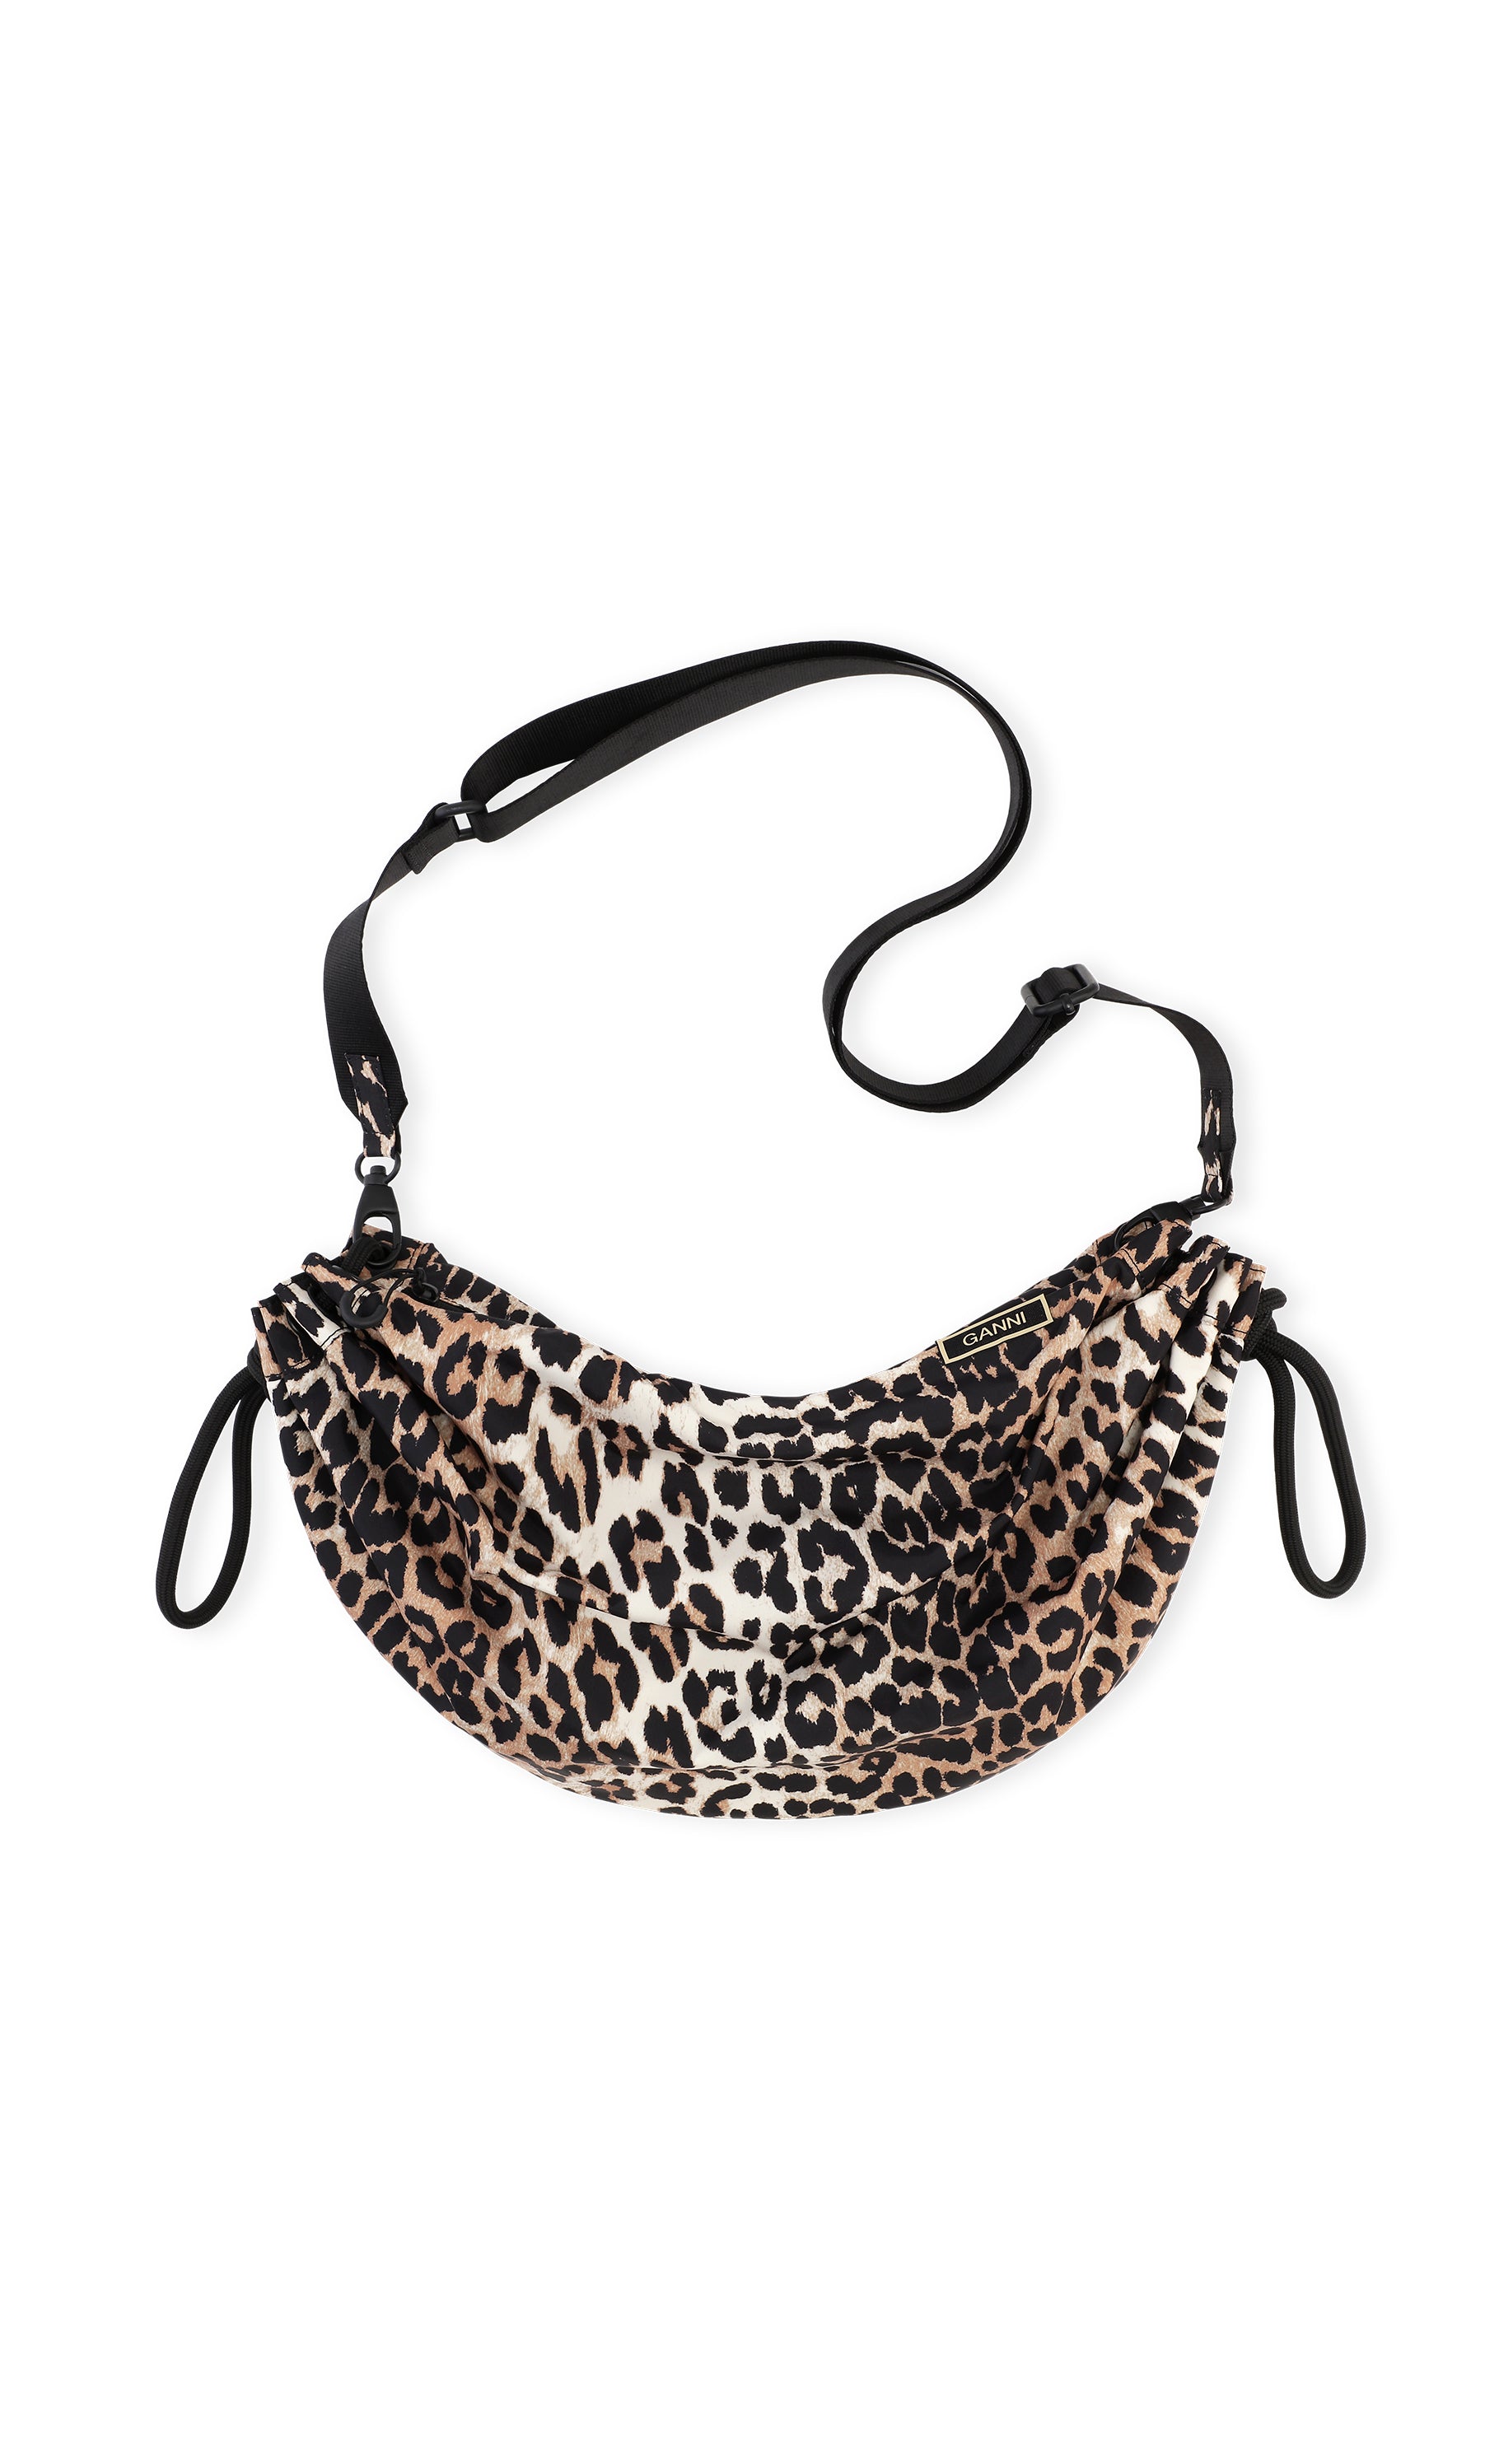 GANNI A3503 Recycled Tech Fabric Duffle Bag in Leopard